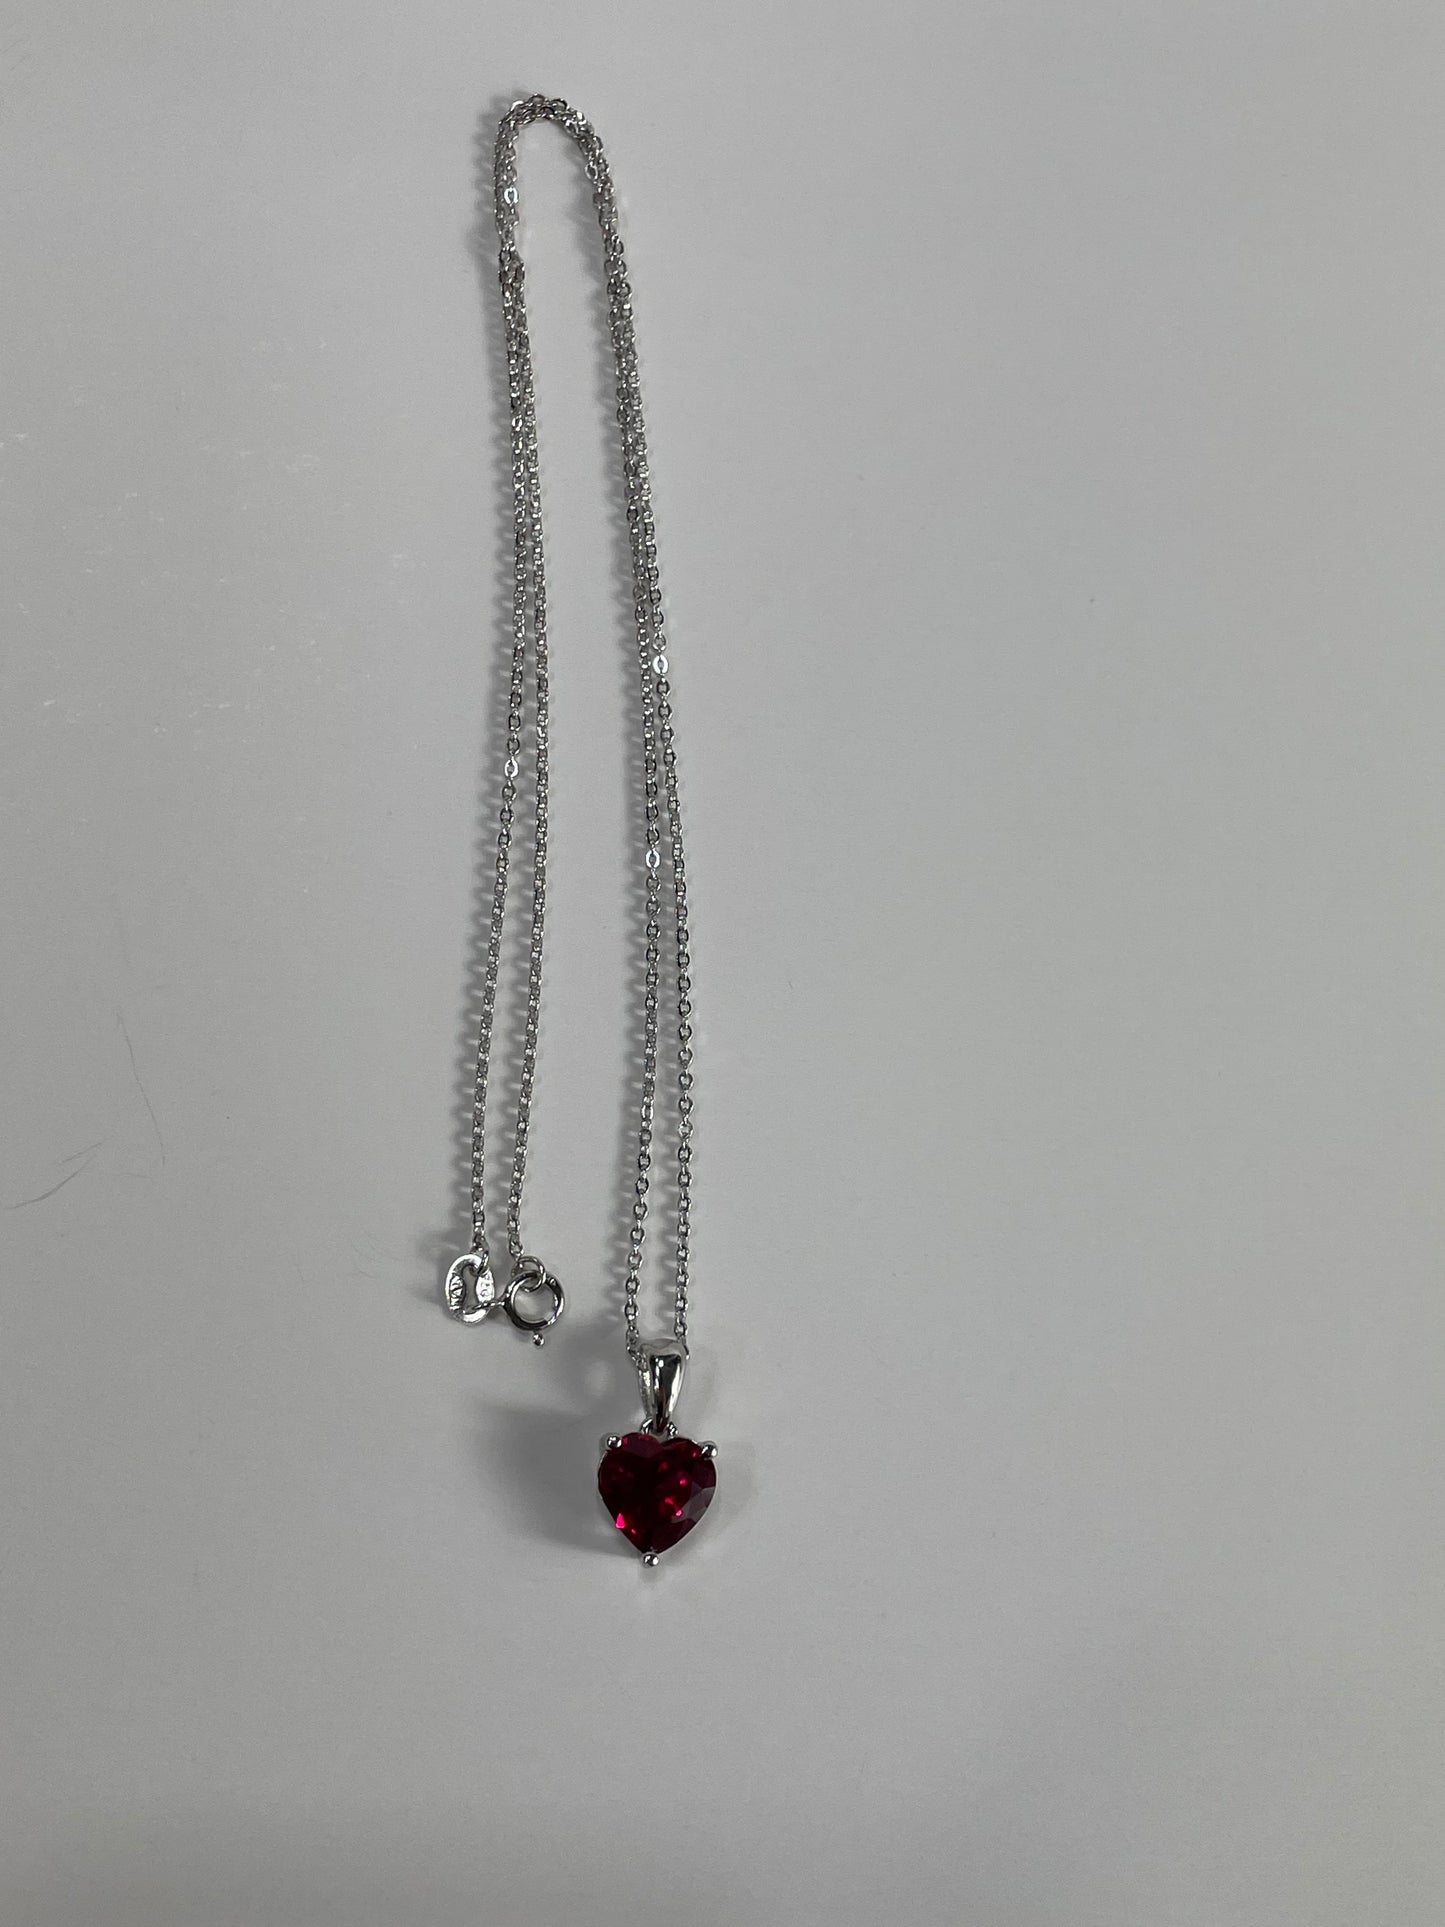 Sterling Silver Necklace with RED Cubic Zirconia Heart Pendant